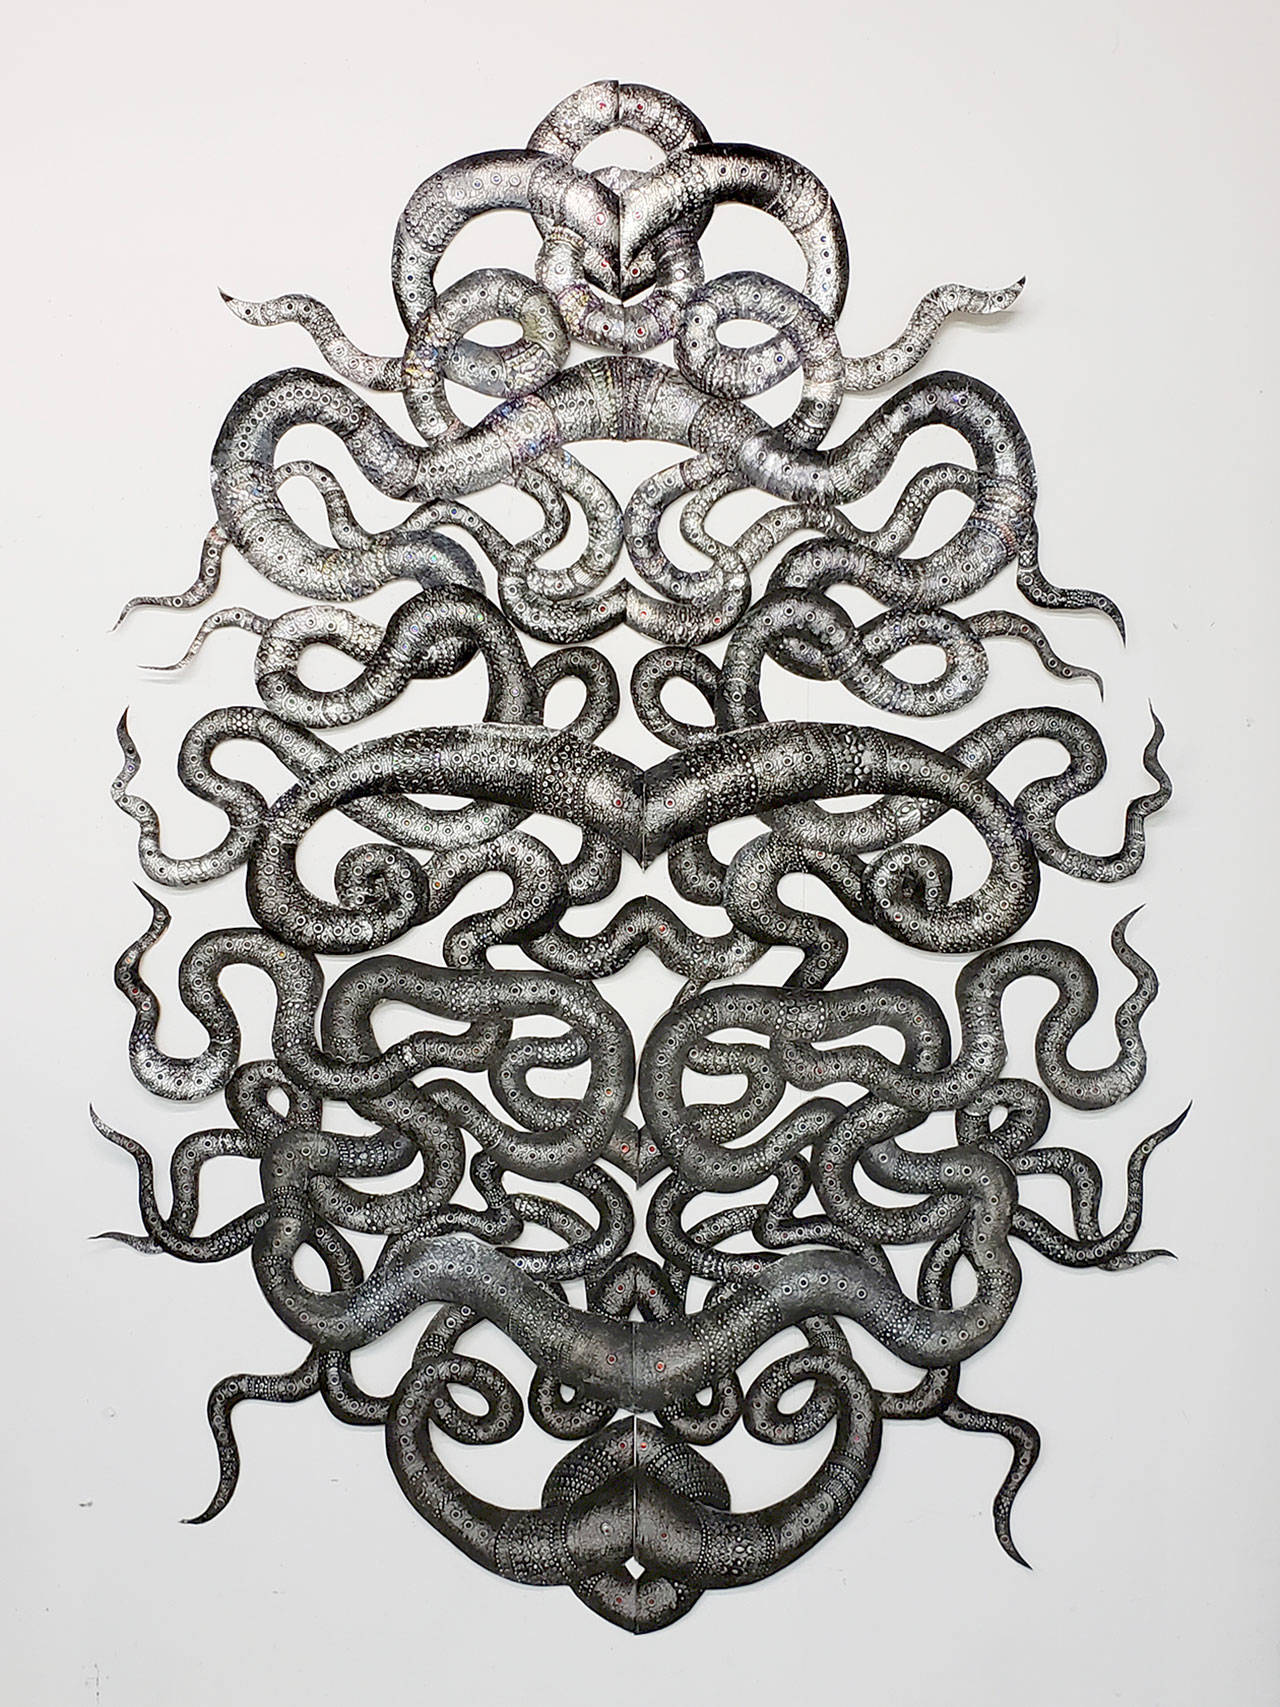 “Kraken” by Elissa Greisz during her solo exhibition titled “Material Witness” will be on display in the Pirate Union Building Gallery of Art at Peninsula College through March 14.